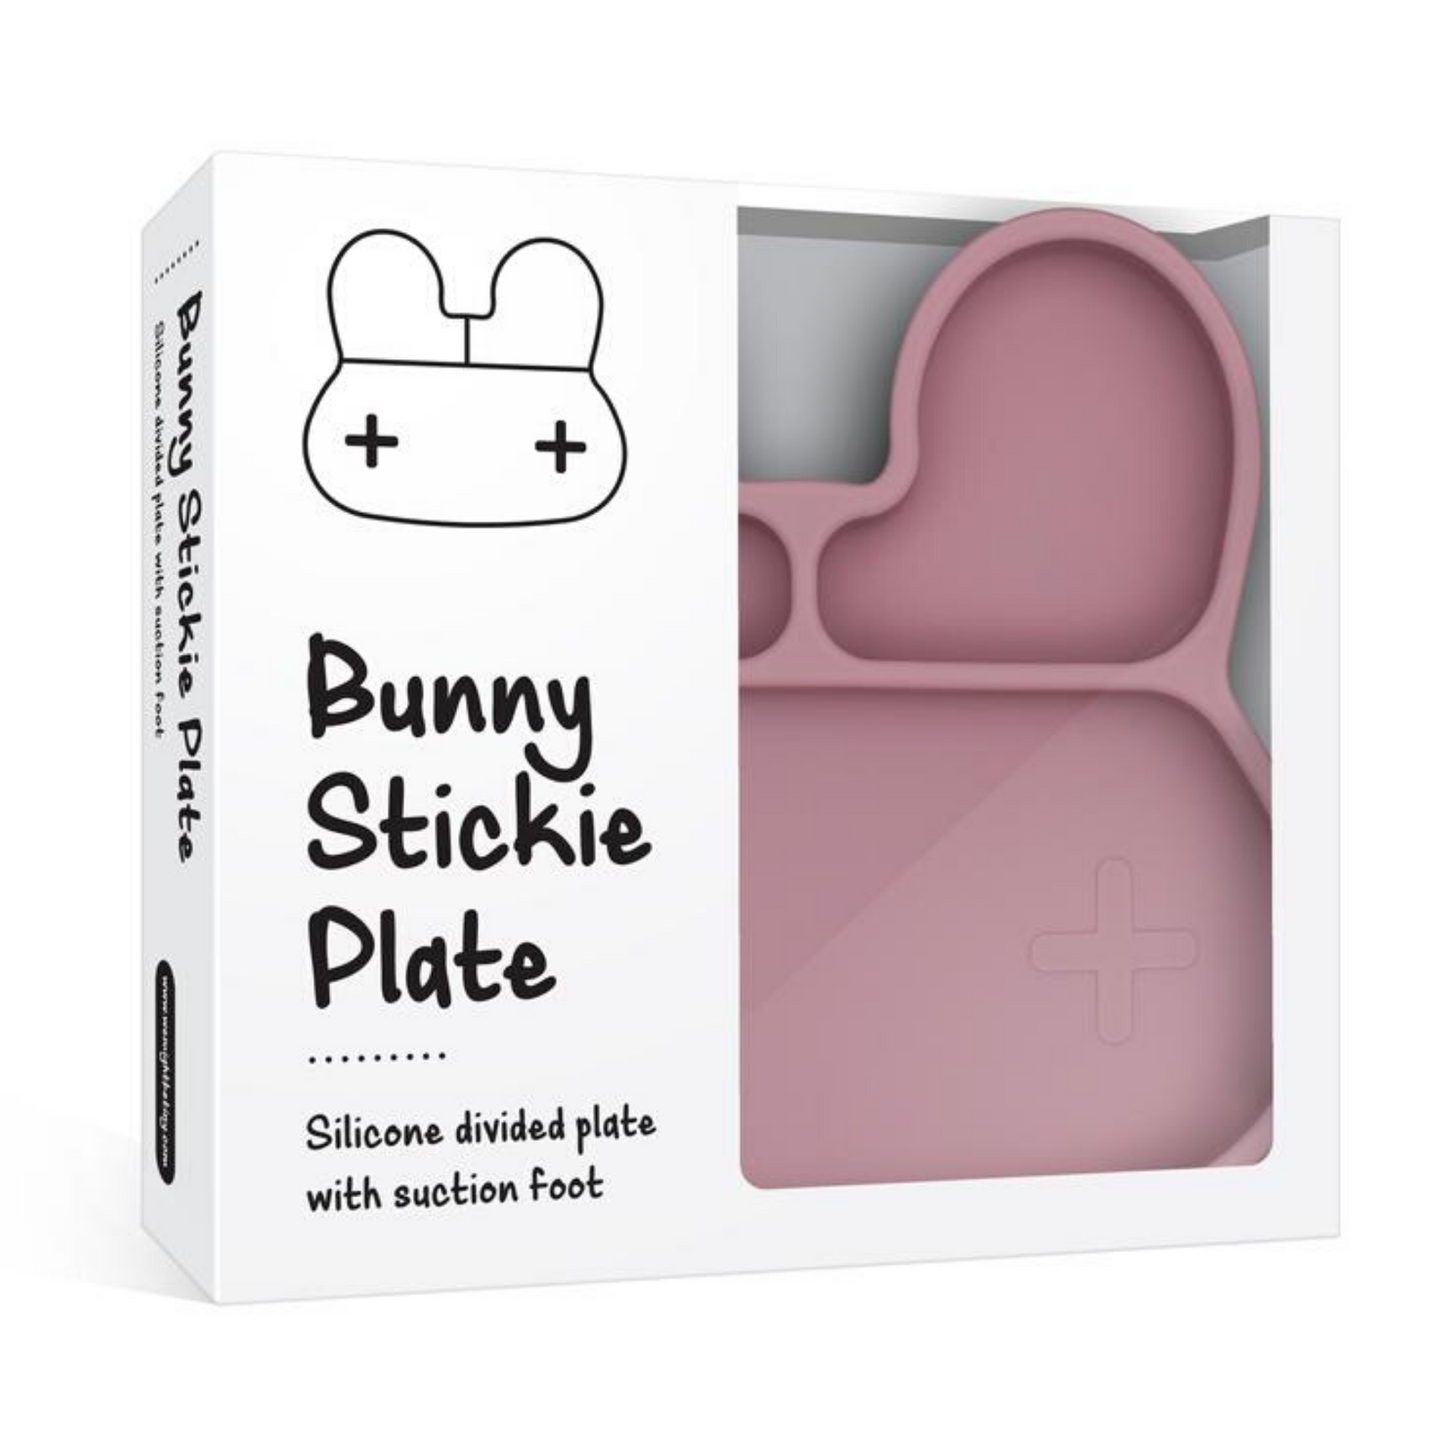 WE MIGHT BE TINY - Bunny Stickie Plate | Dusty Rose